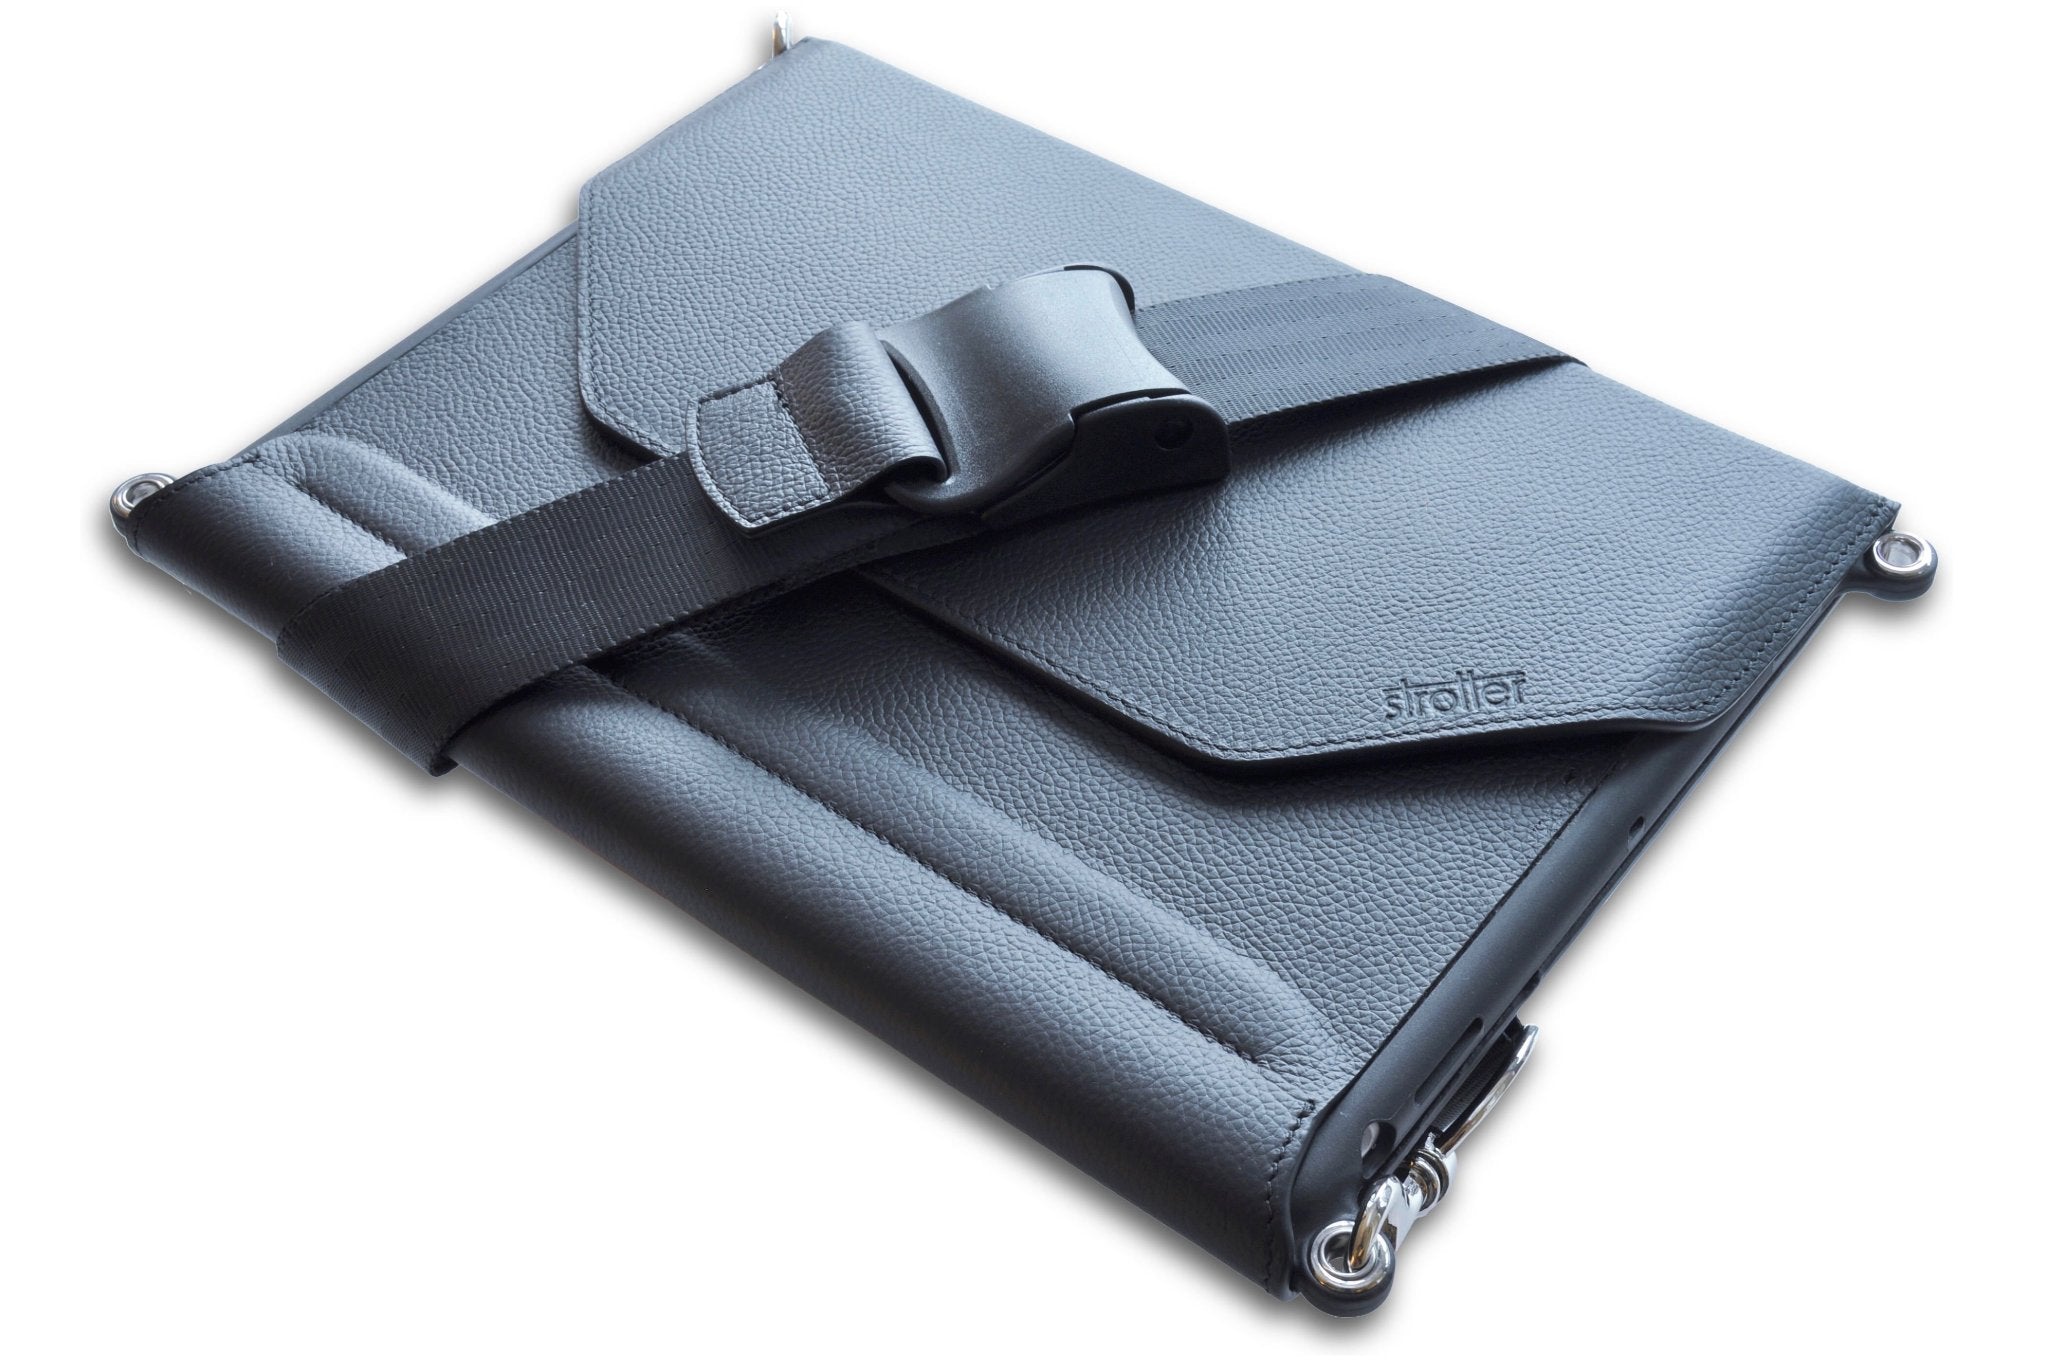 Leather case with shoulder strap for iPad Pro 10.5" made in Italy